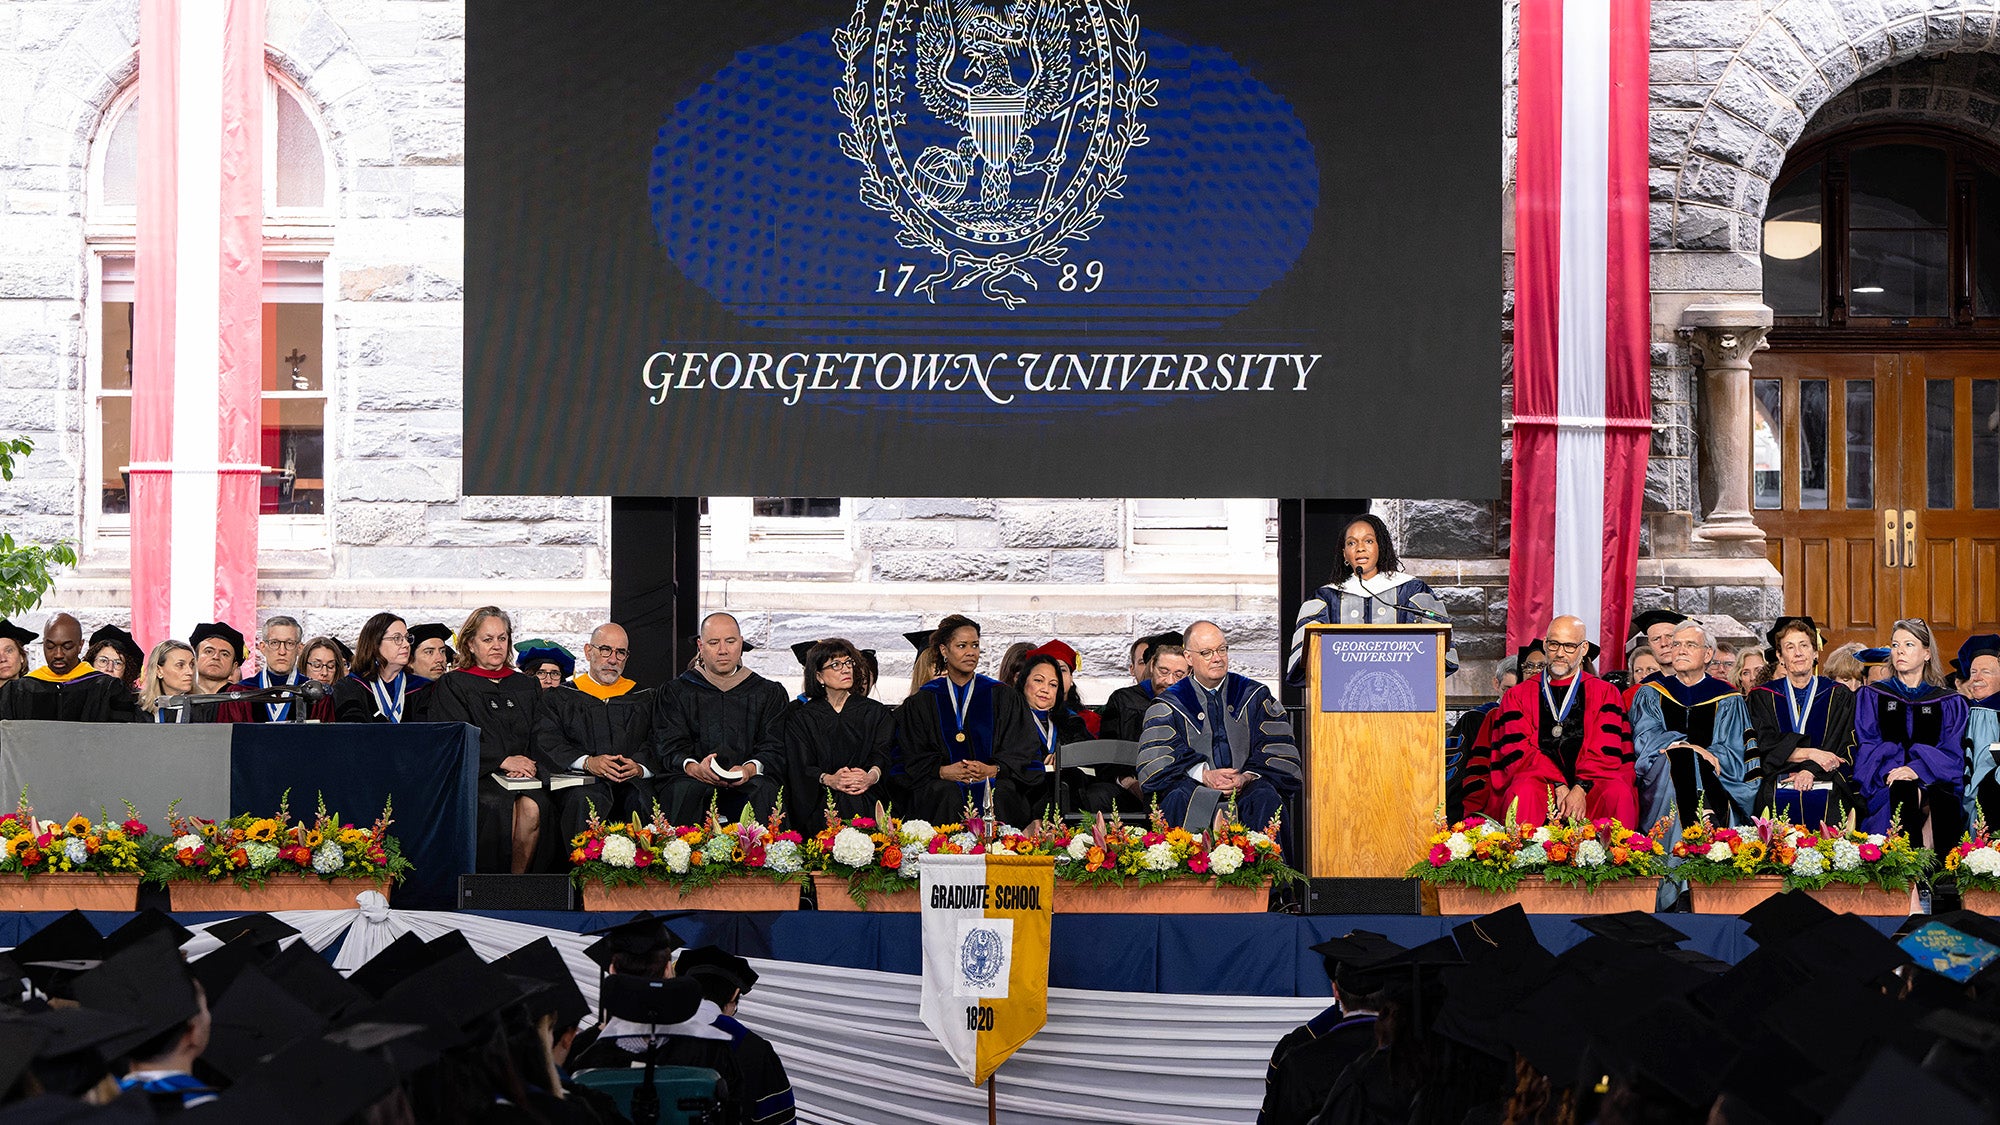 A wide view of the stage at Commencement where the speaker is talking at a podium and the faculty are seated behind her